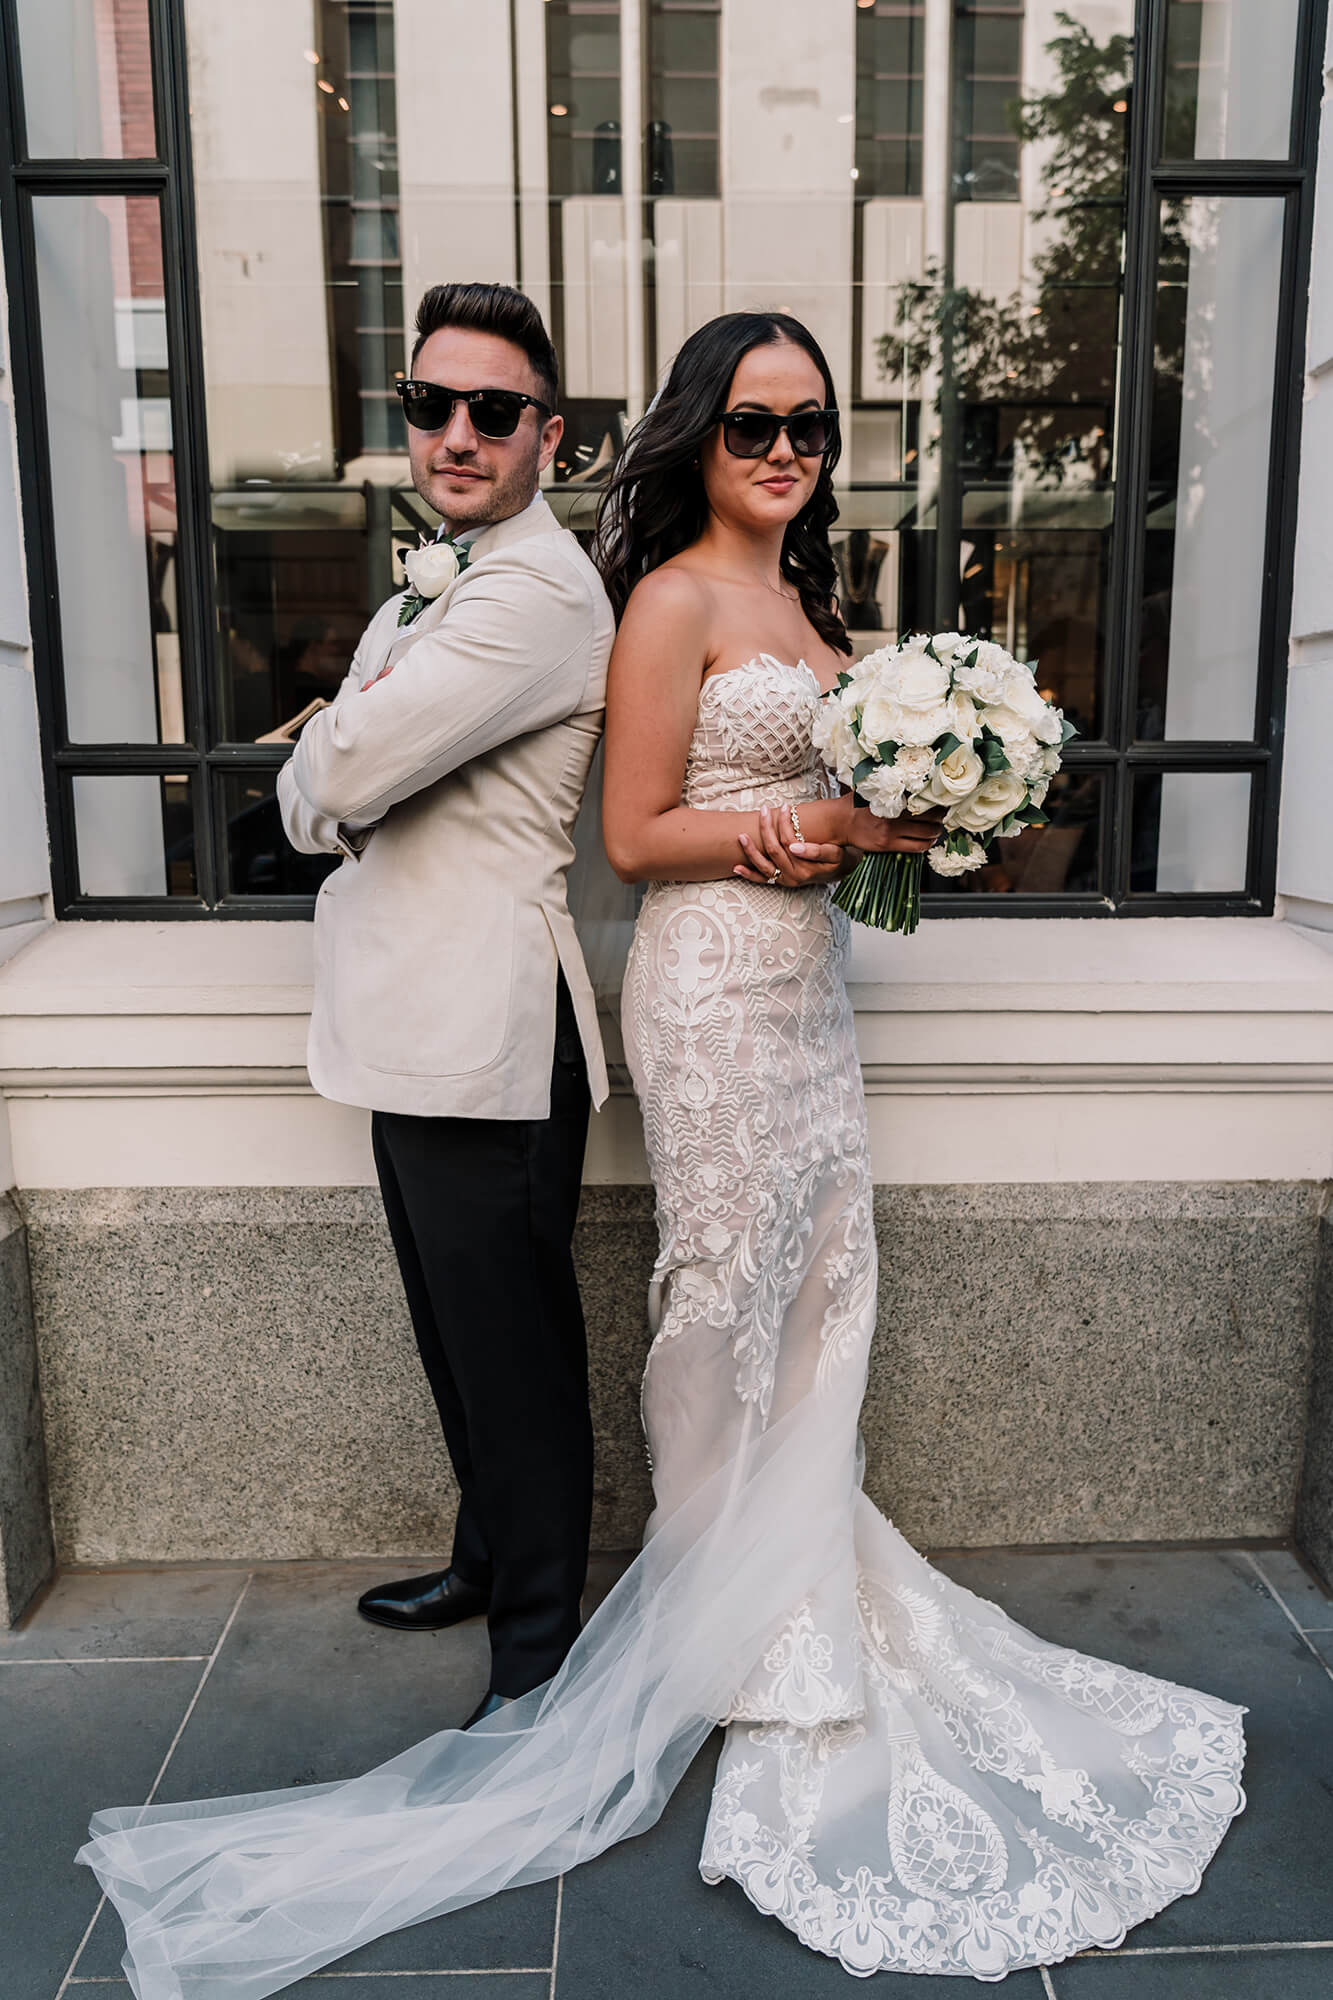 Engagement Photo Ideas, Bride and Groom wears shades in this cool shoot by the alley by Black Avenue Productions